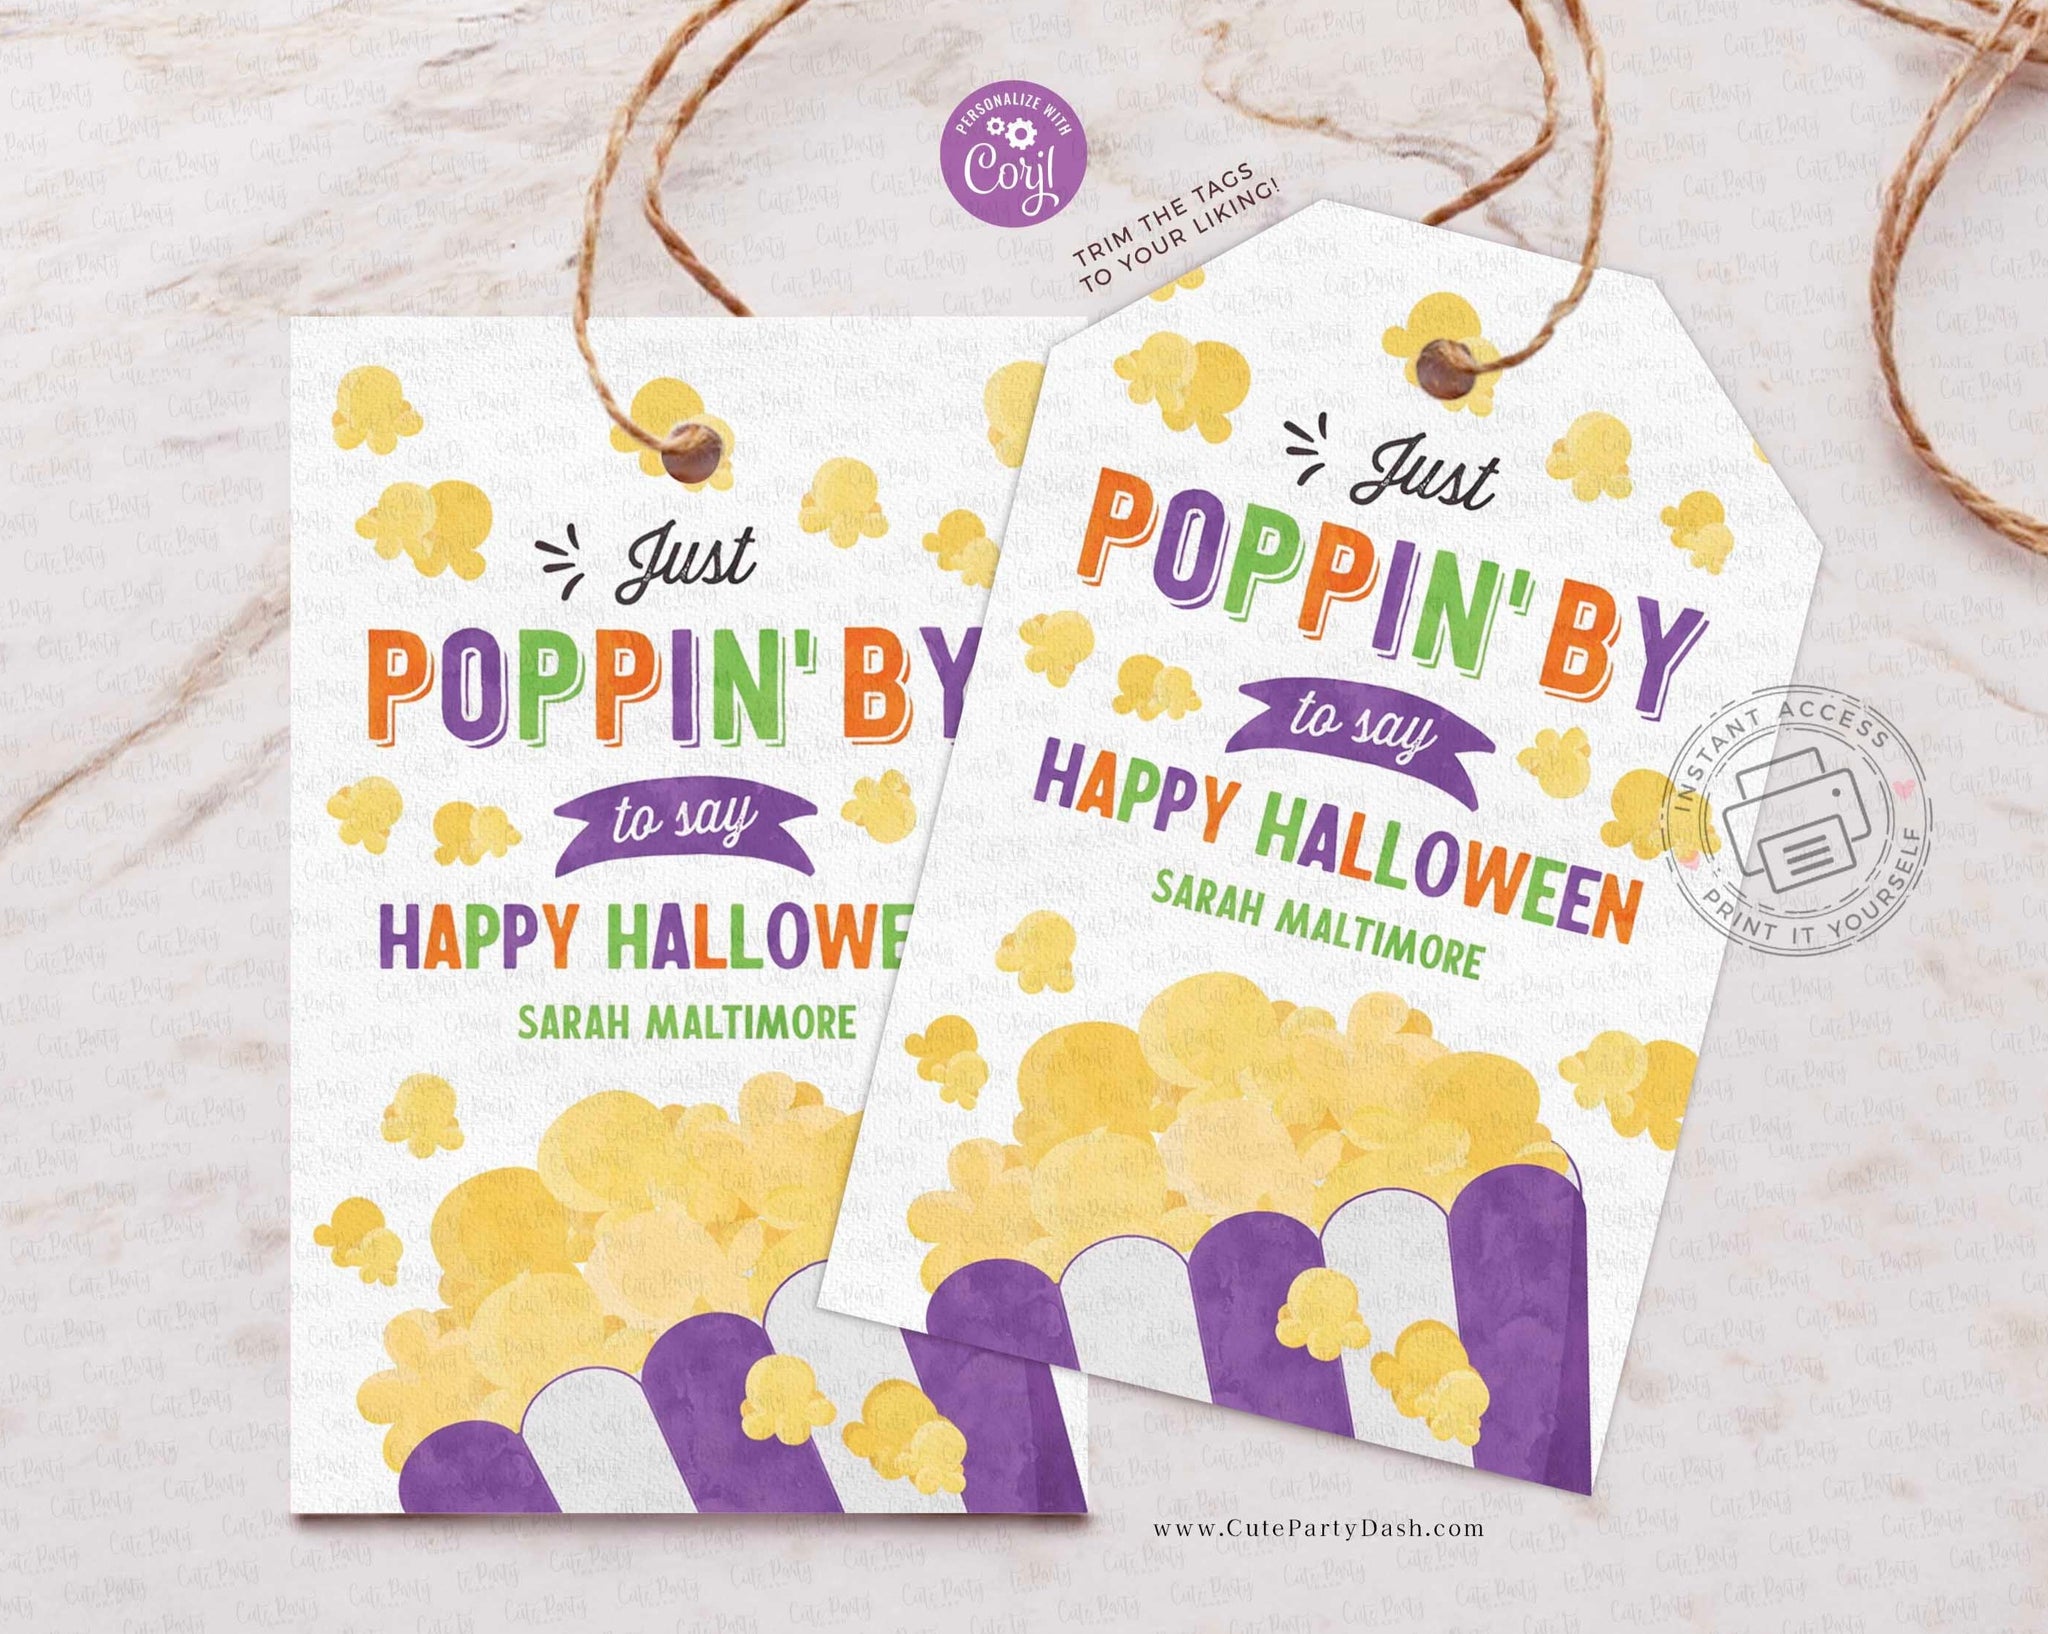 Halloween Popcorn Thank You Just Poppin' by Gift Tag - Digital Download